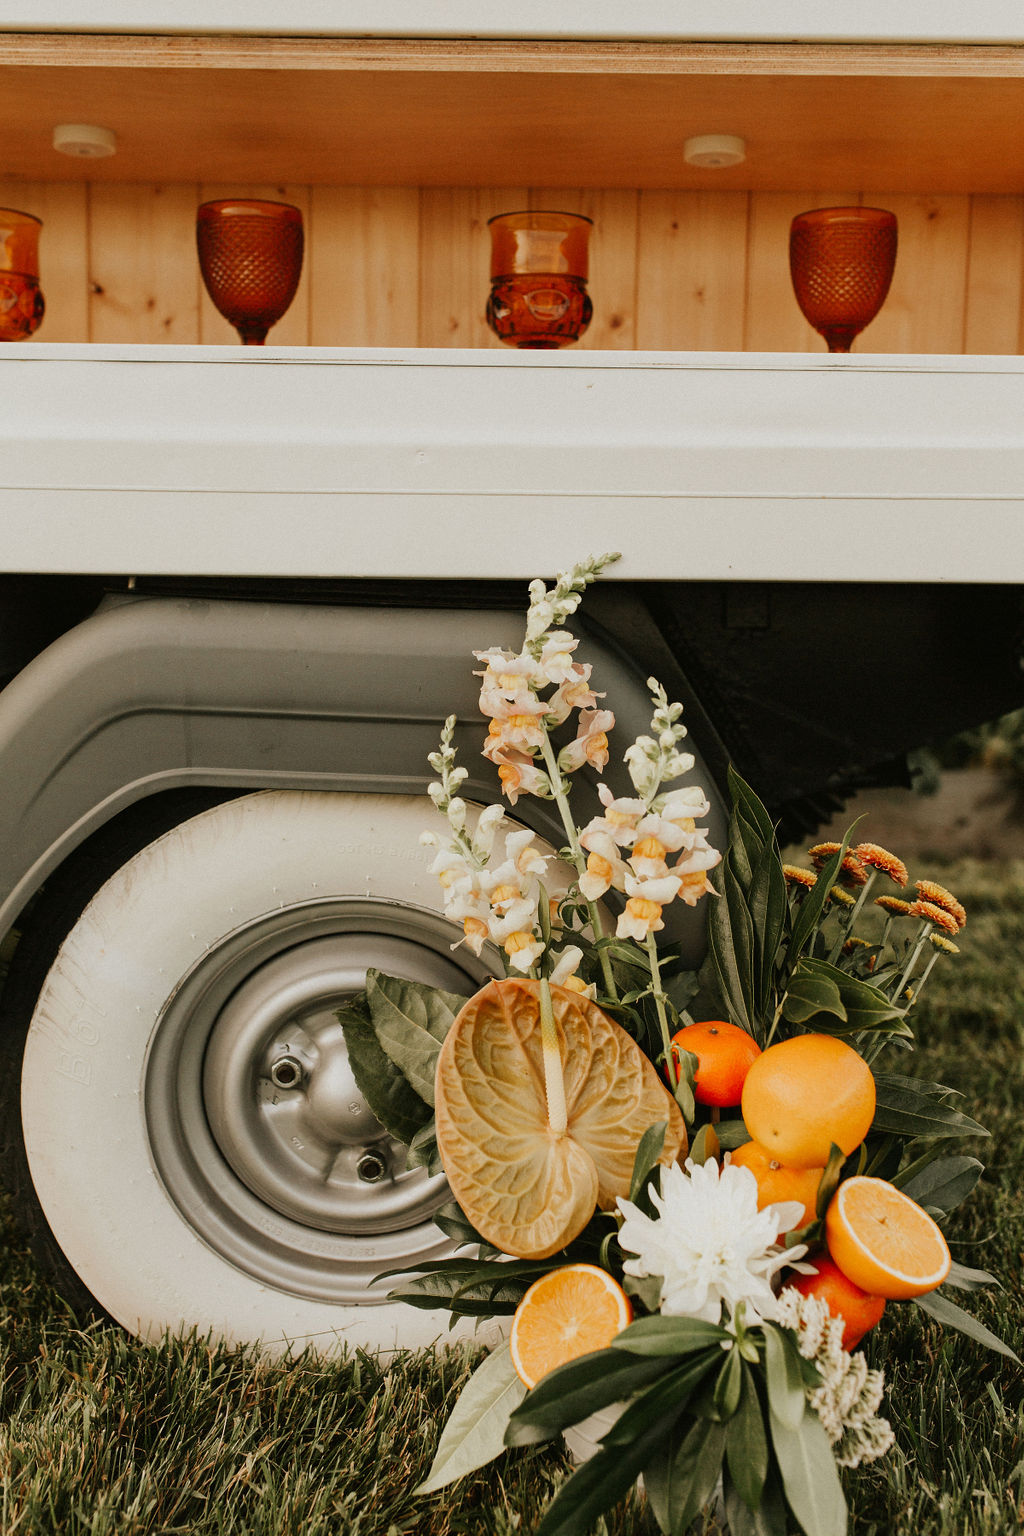 Prosecco mobile bar cart decorated for a tangerine inspired wedding editorial at The Gathered, a wedding venue near Calgary Alberta